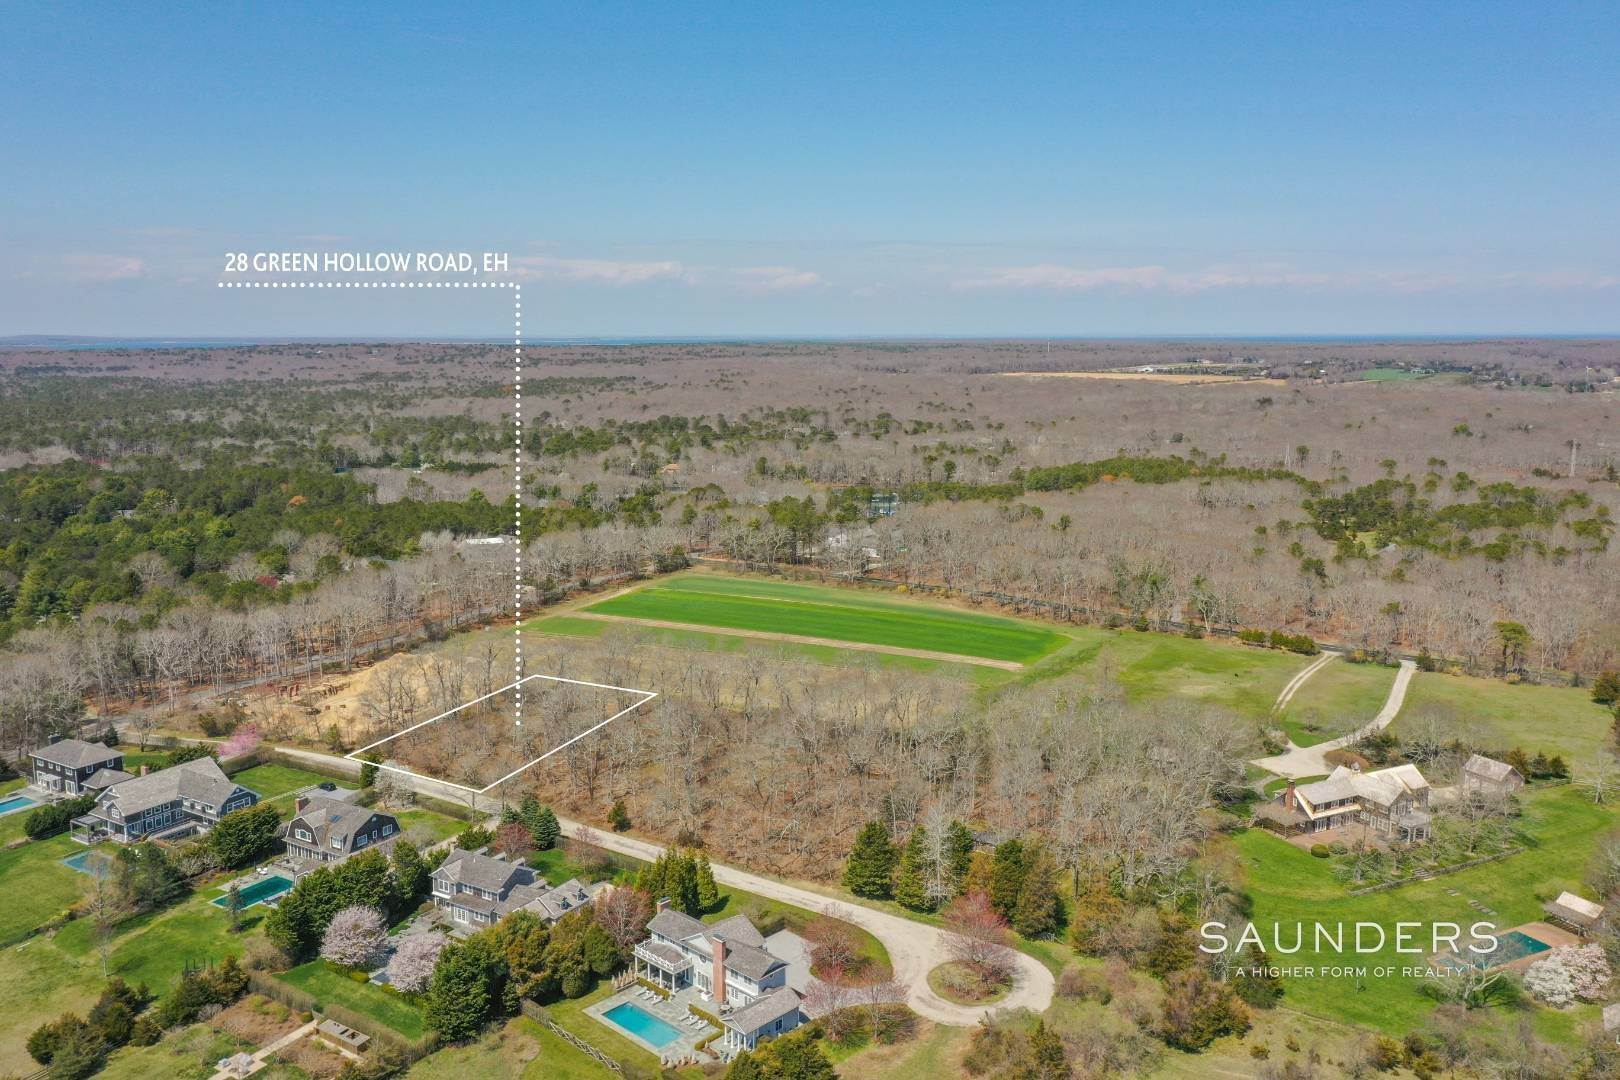 Land for Sale at Premier Land Opportunity With Reserve Views 28 Green Hollow Road, East Hampton North, East Hampton, NY 11937